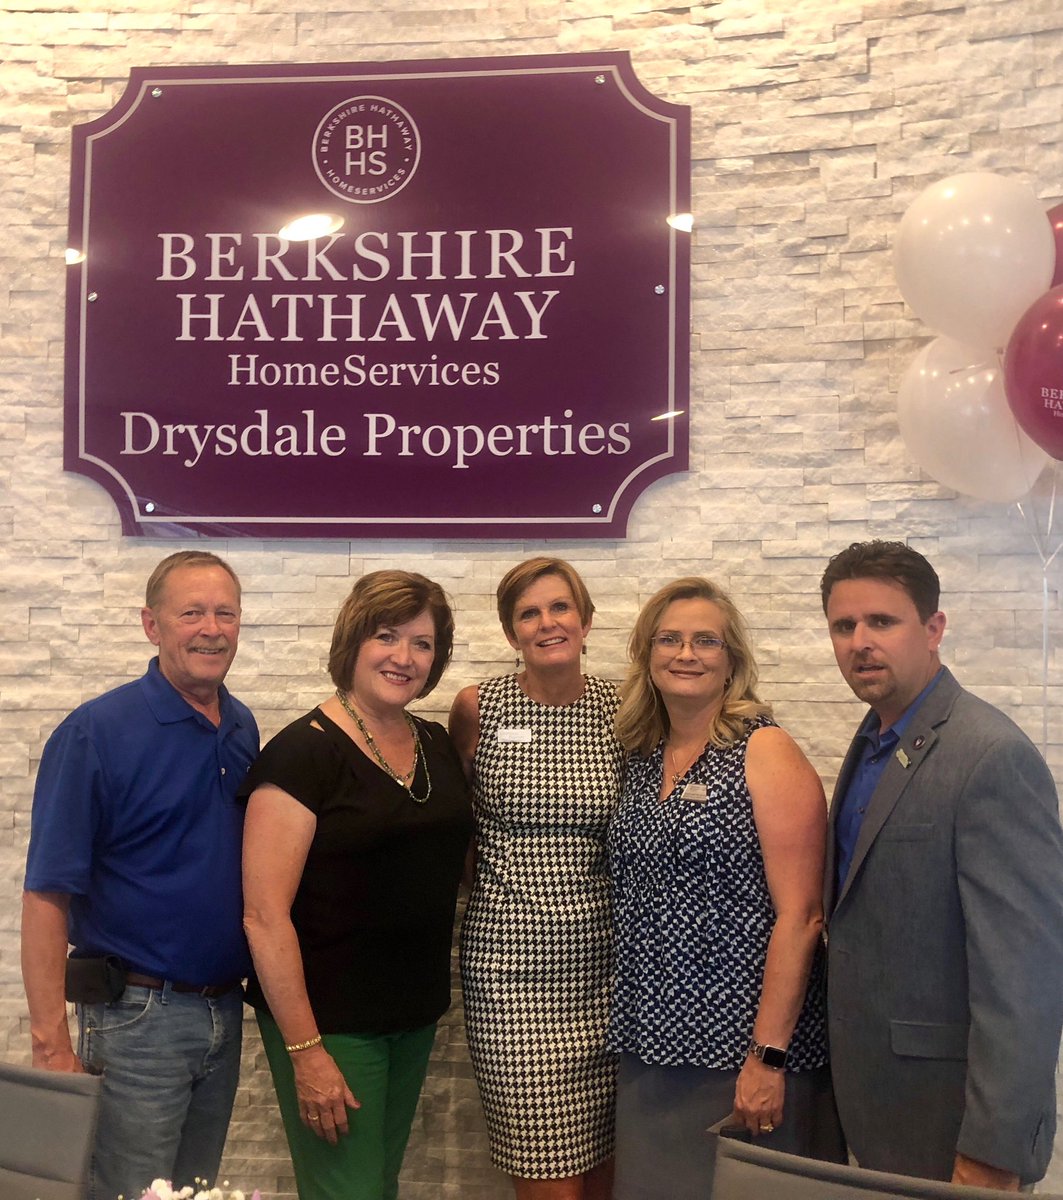 @BerkshireHathaway Home Services- welcome to the #cityofsparks! With Councilmen Smith & Dahir at their ribbon-cutting today. #sparksproud #businessfriendly